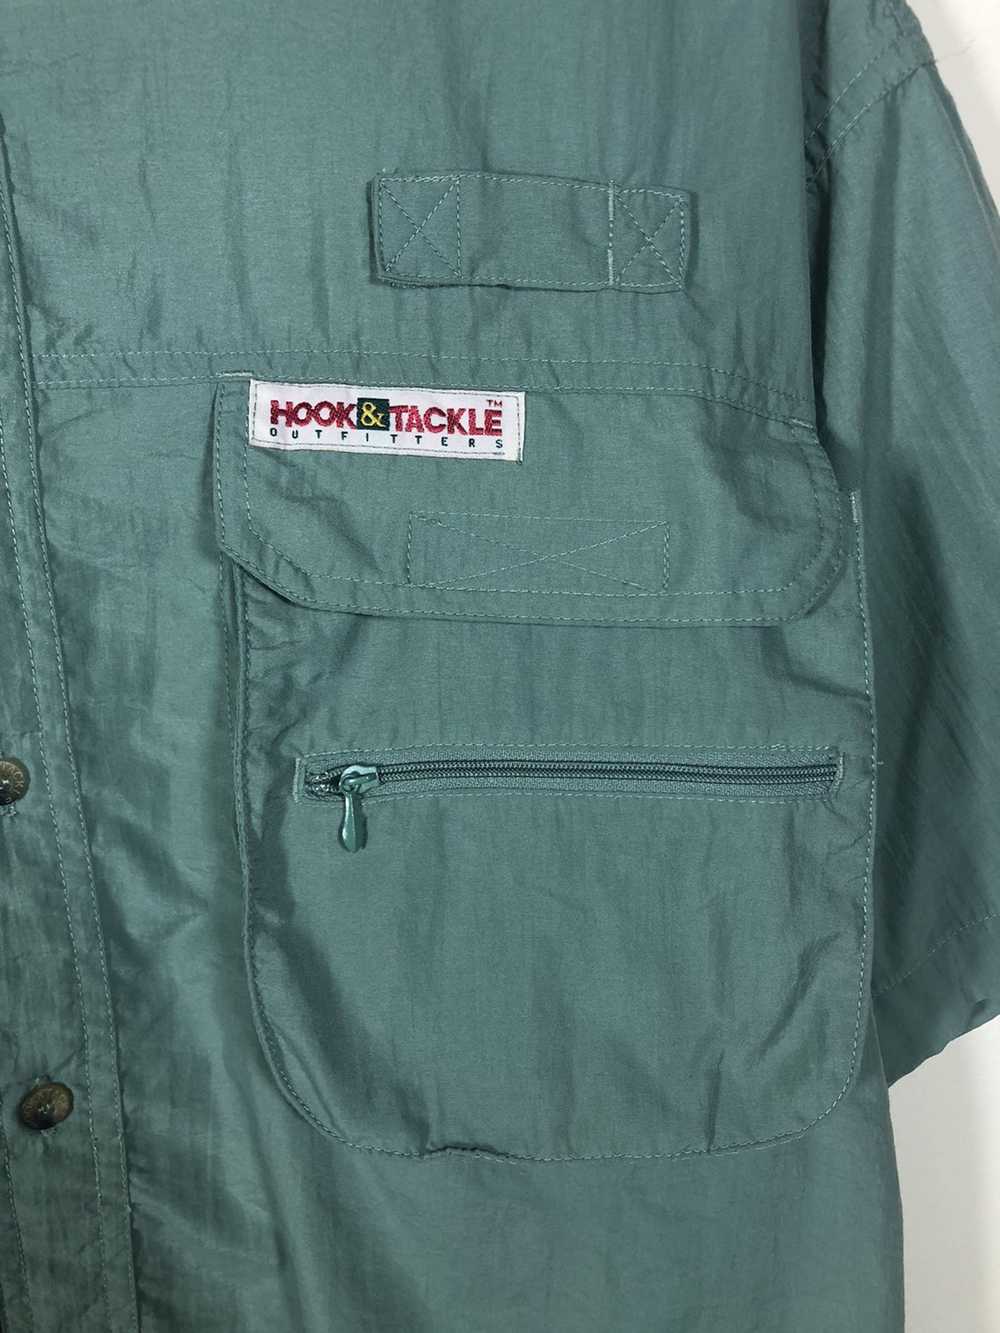 Japanese Brand Hook and tackle fishing shirt butt… - image 5